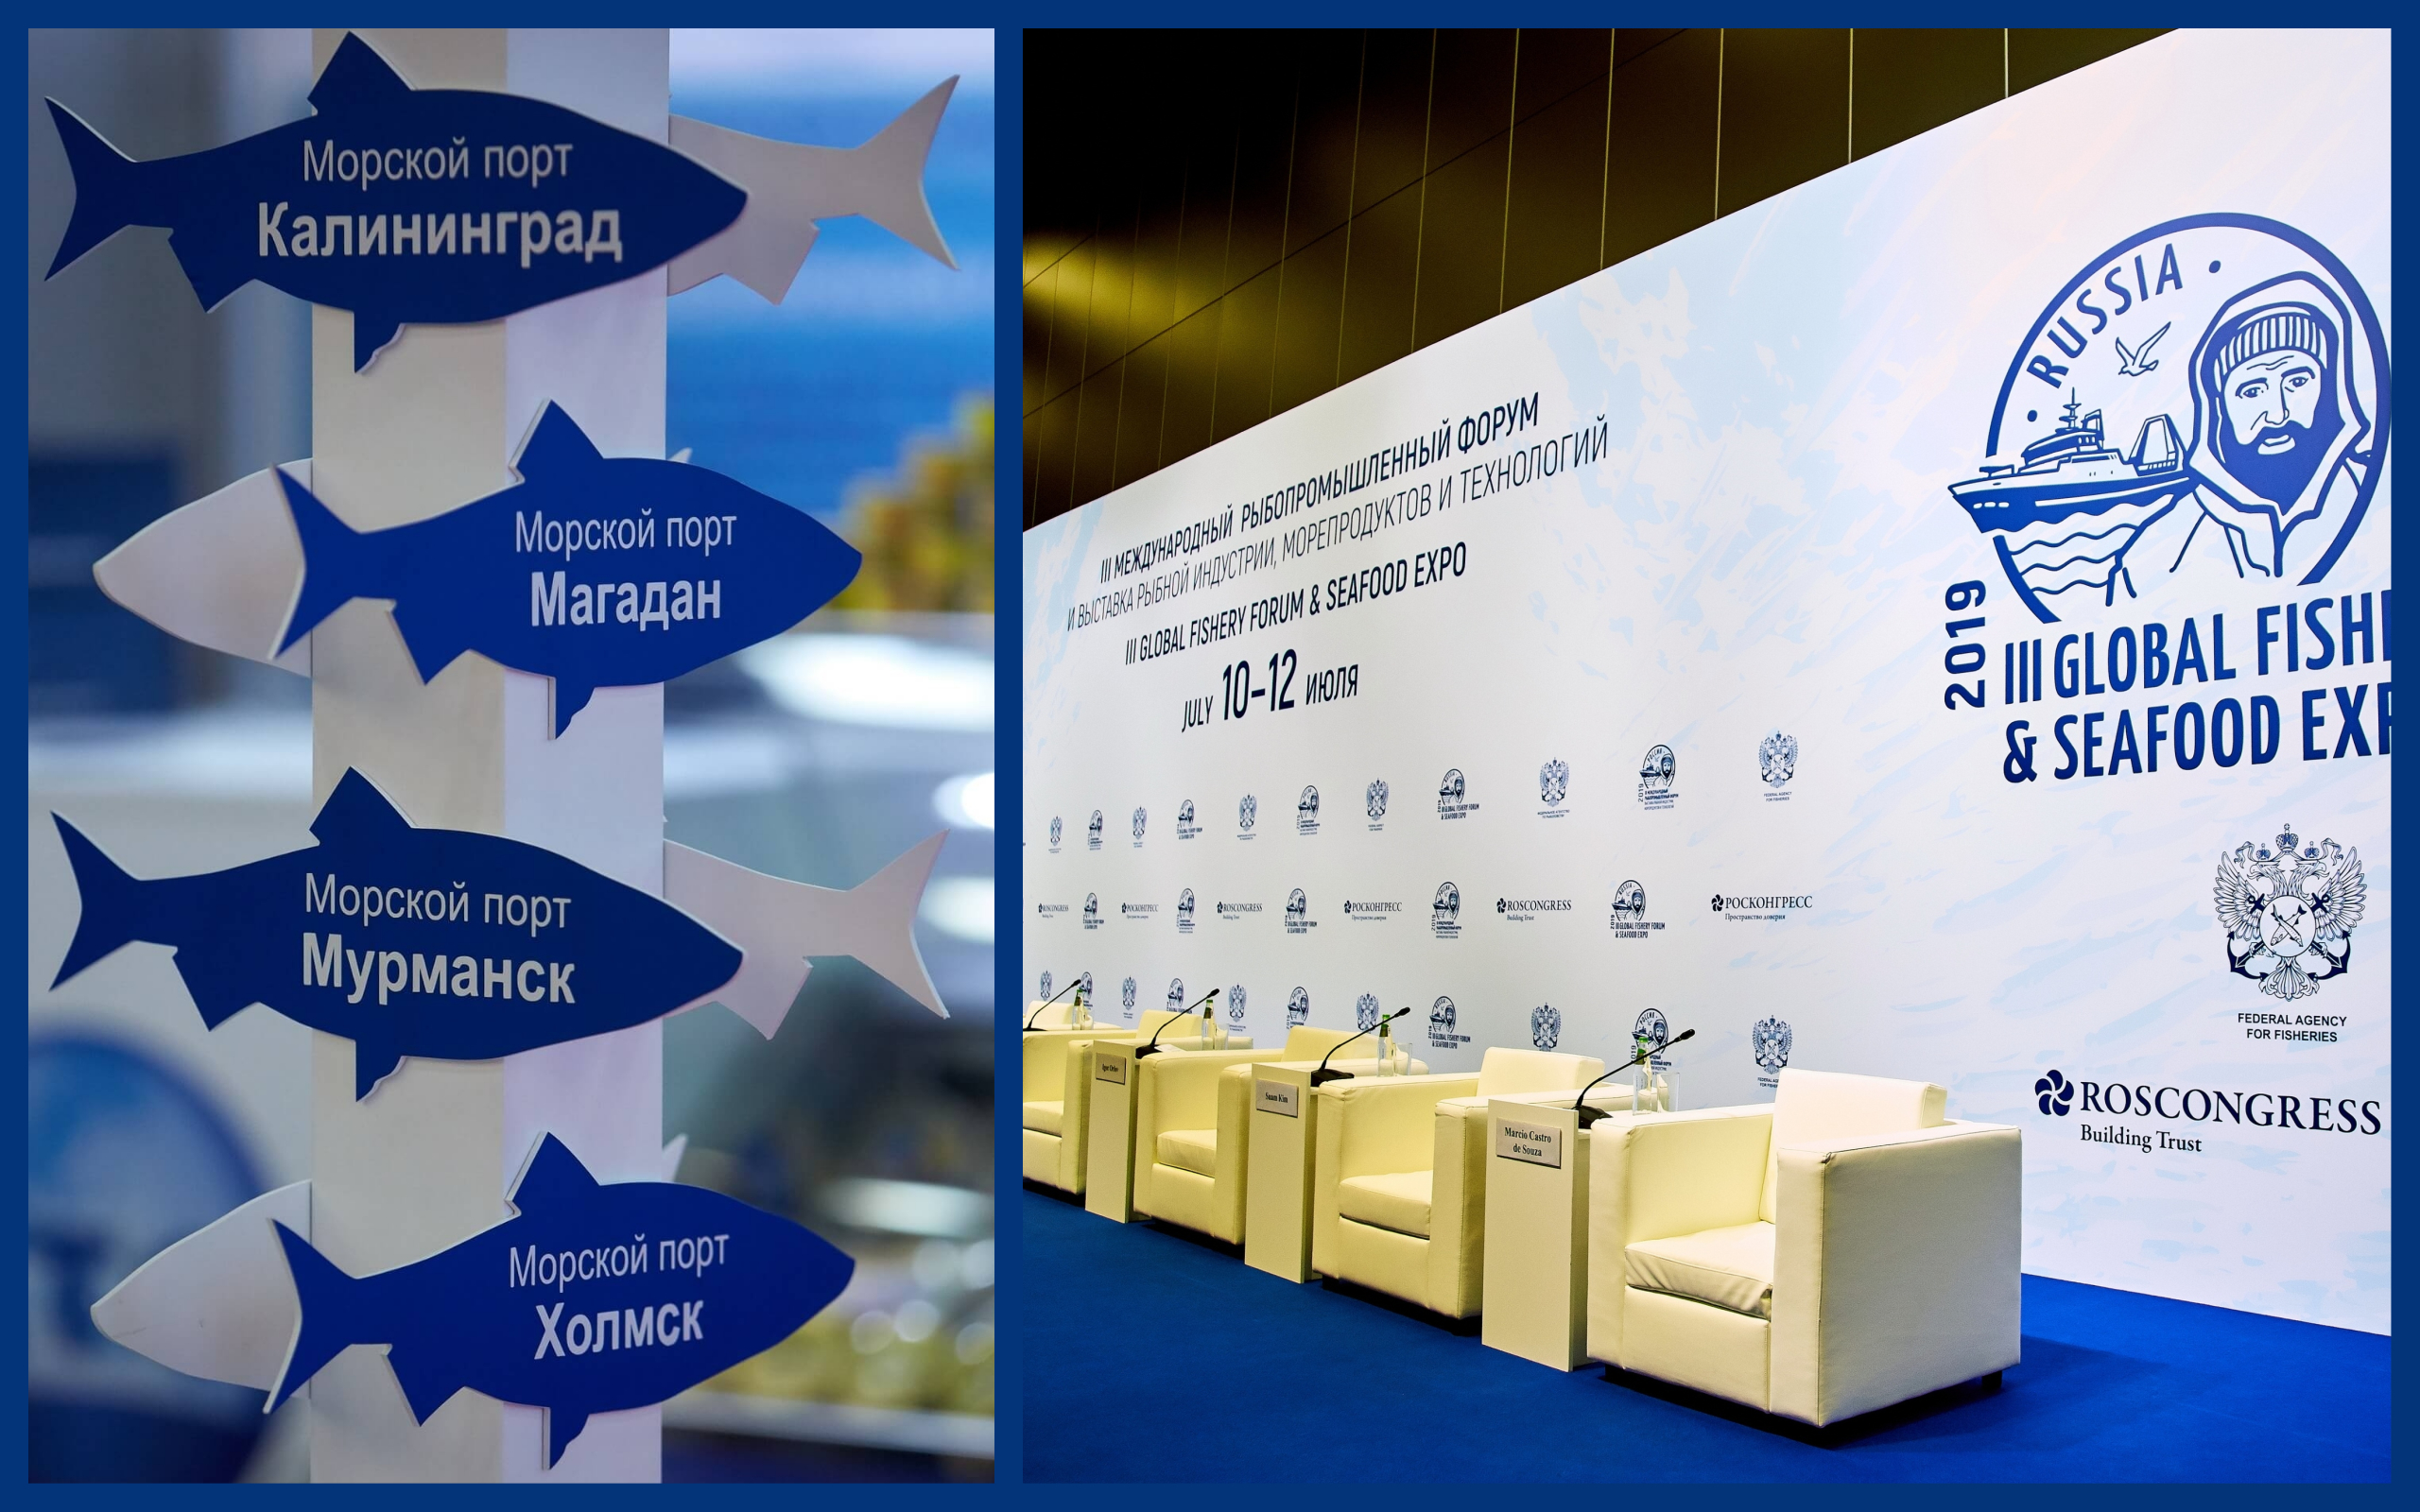 Storage and Logistics problems to be discussed during IV Global Fishery Forum & Seafood Expo Russia 